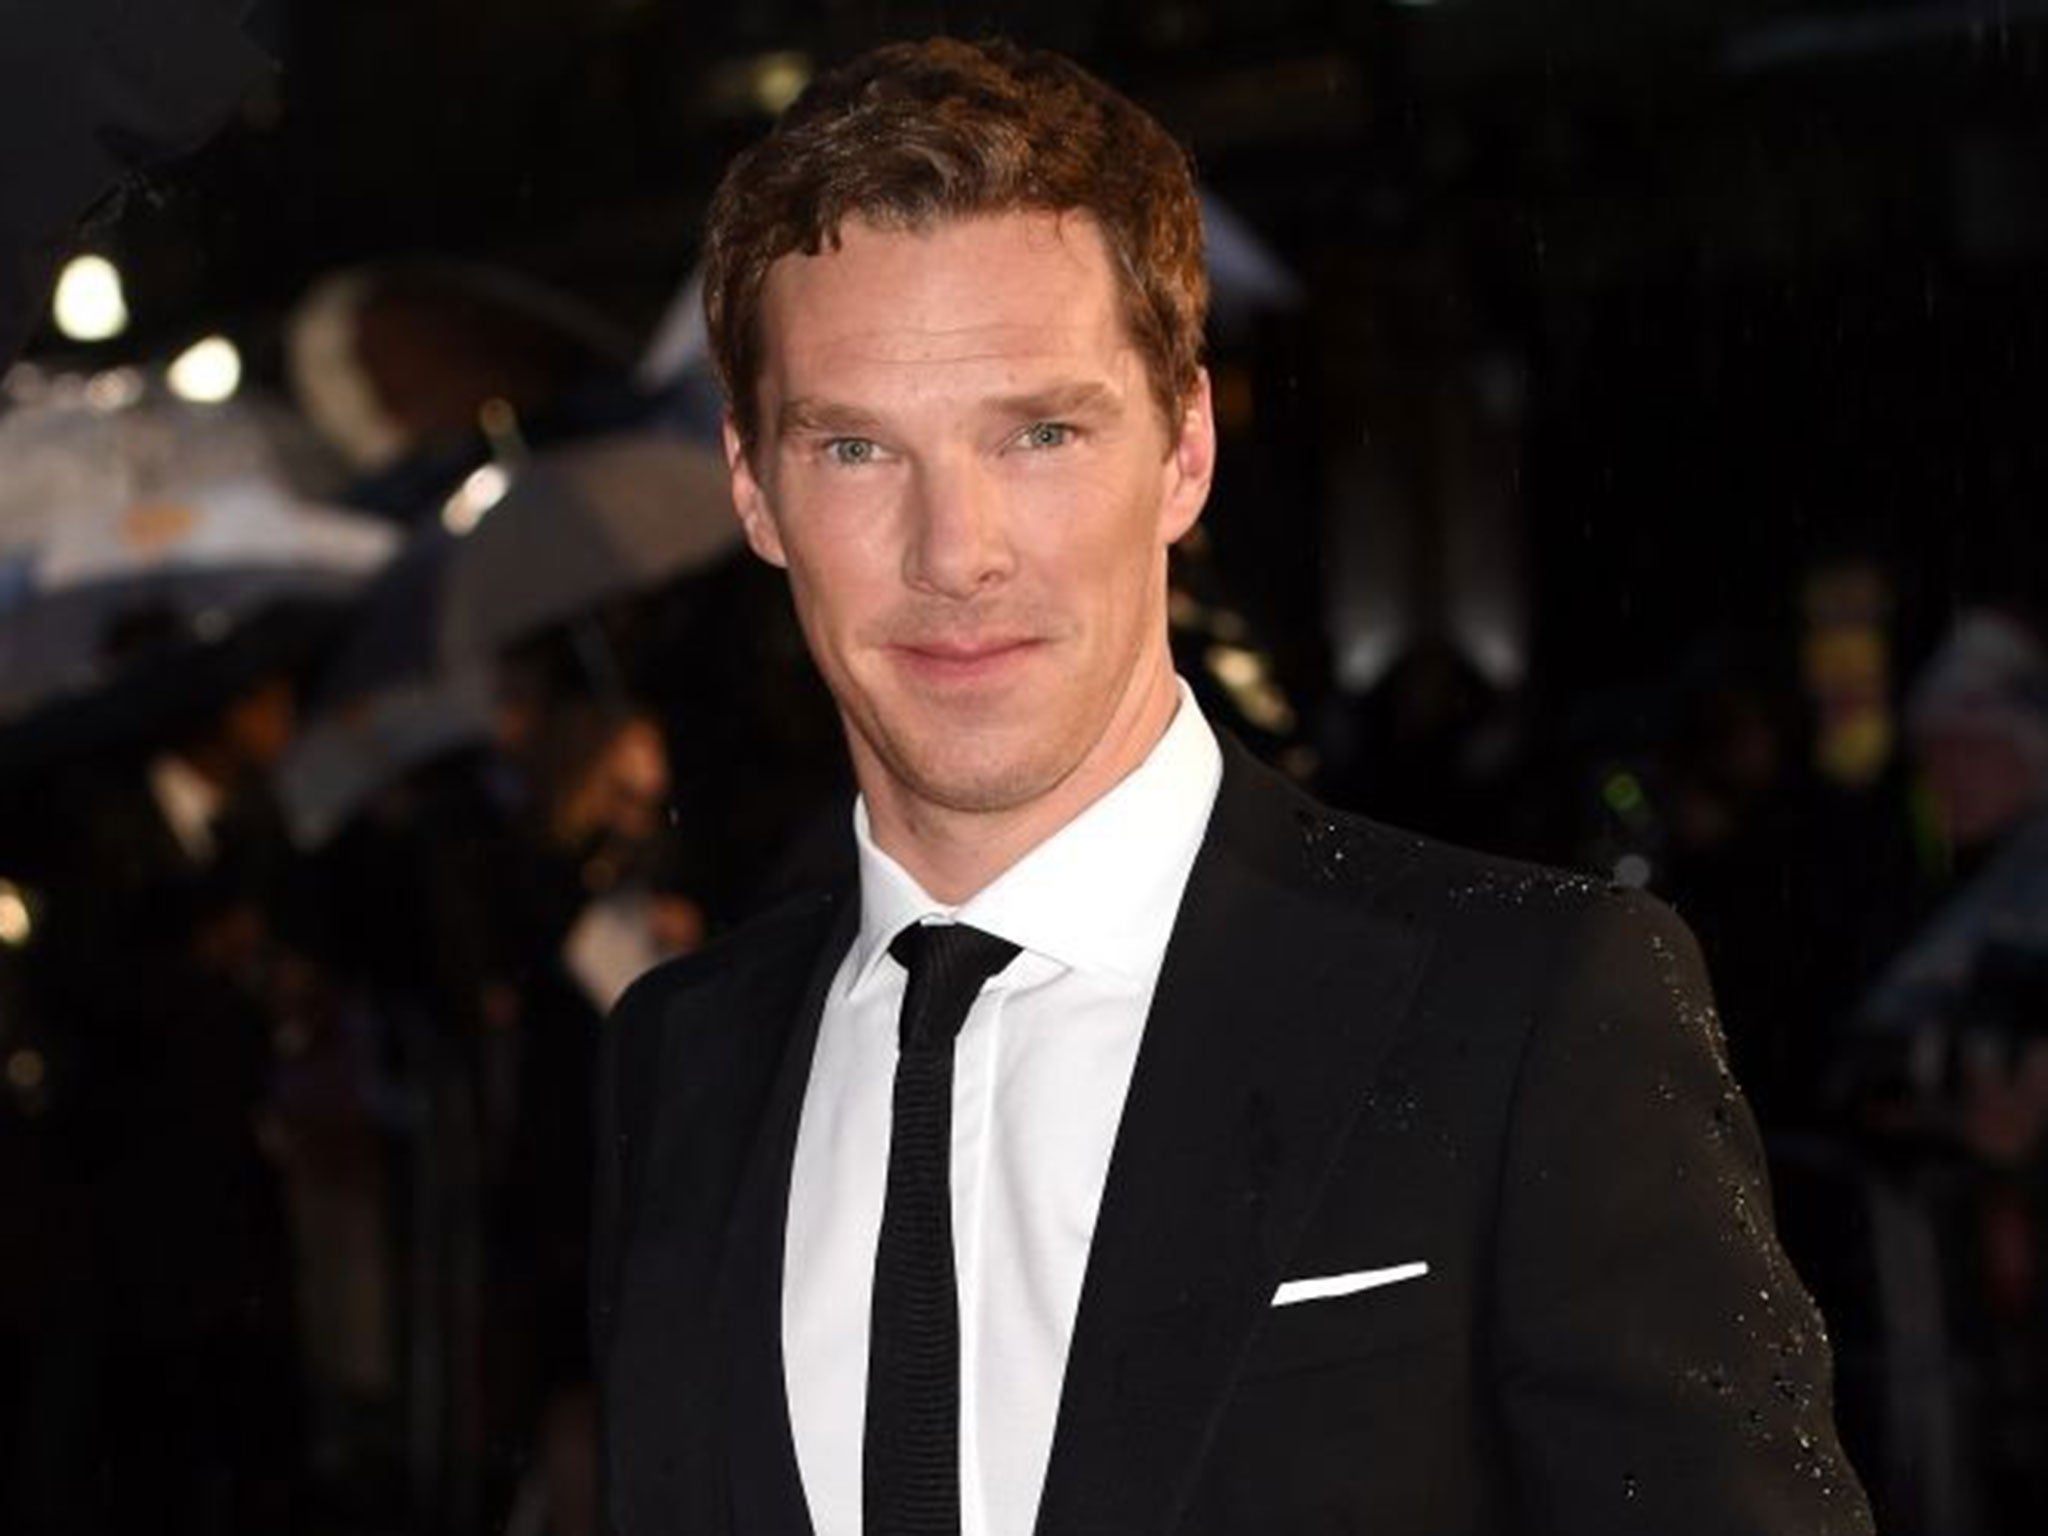 Benedict Cumberbatch will be honoured at the BIFAs